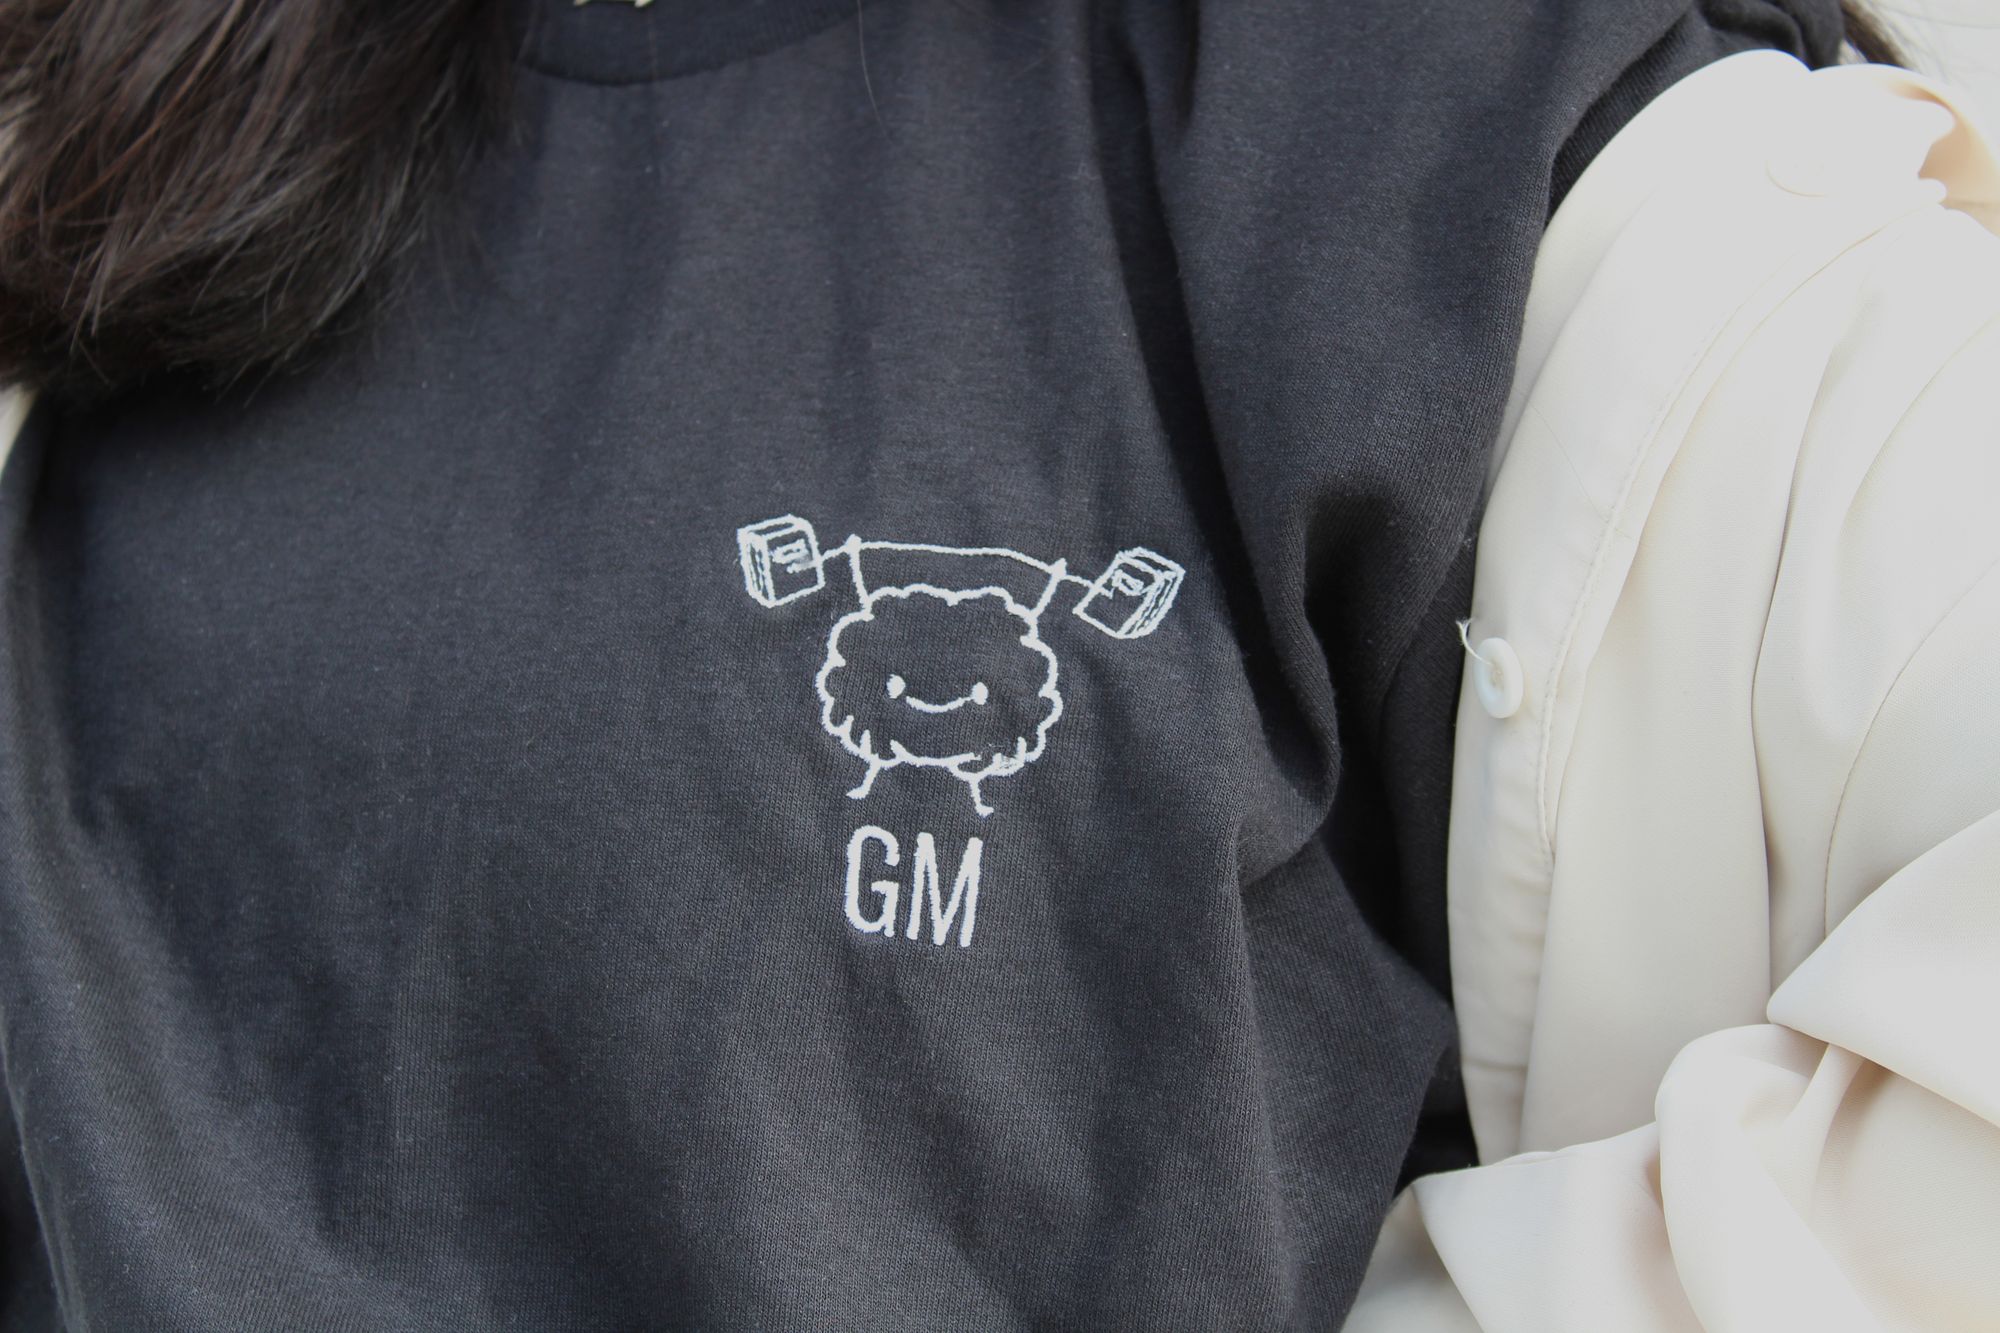 close-up of the Grey Matters workout icon on the T-shirt